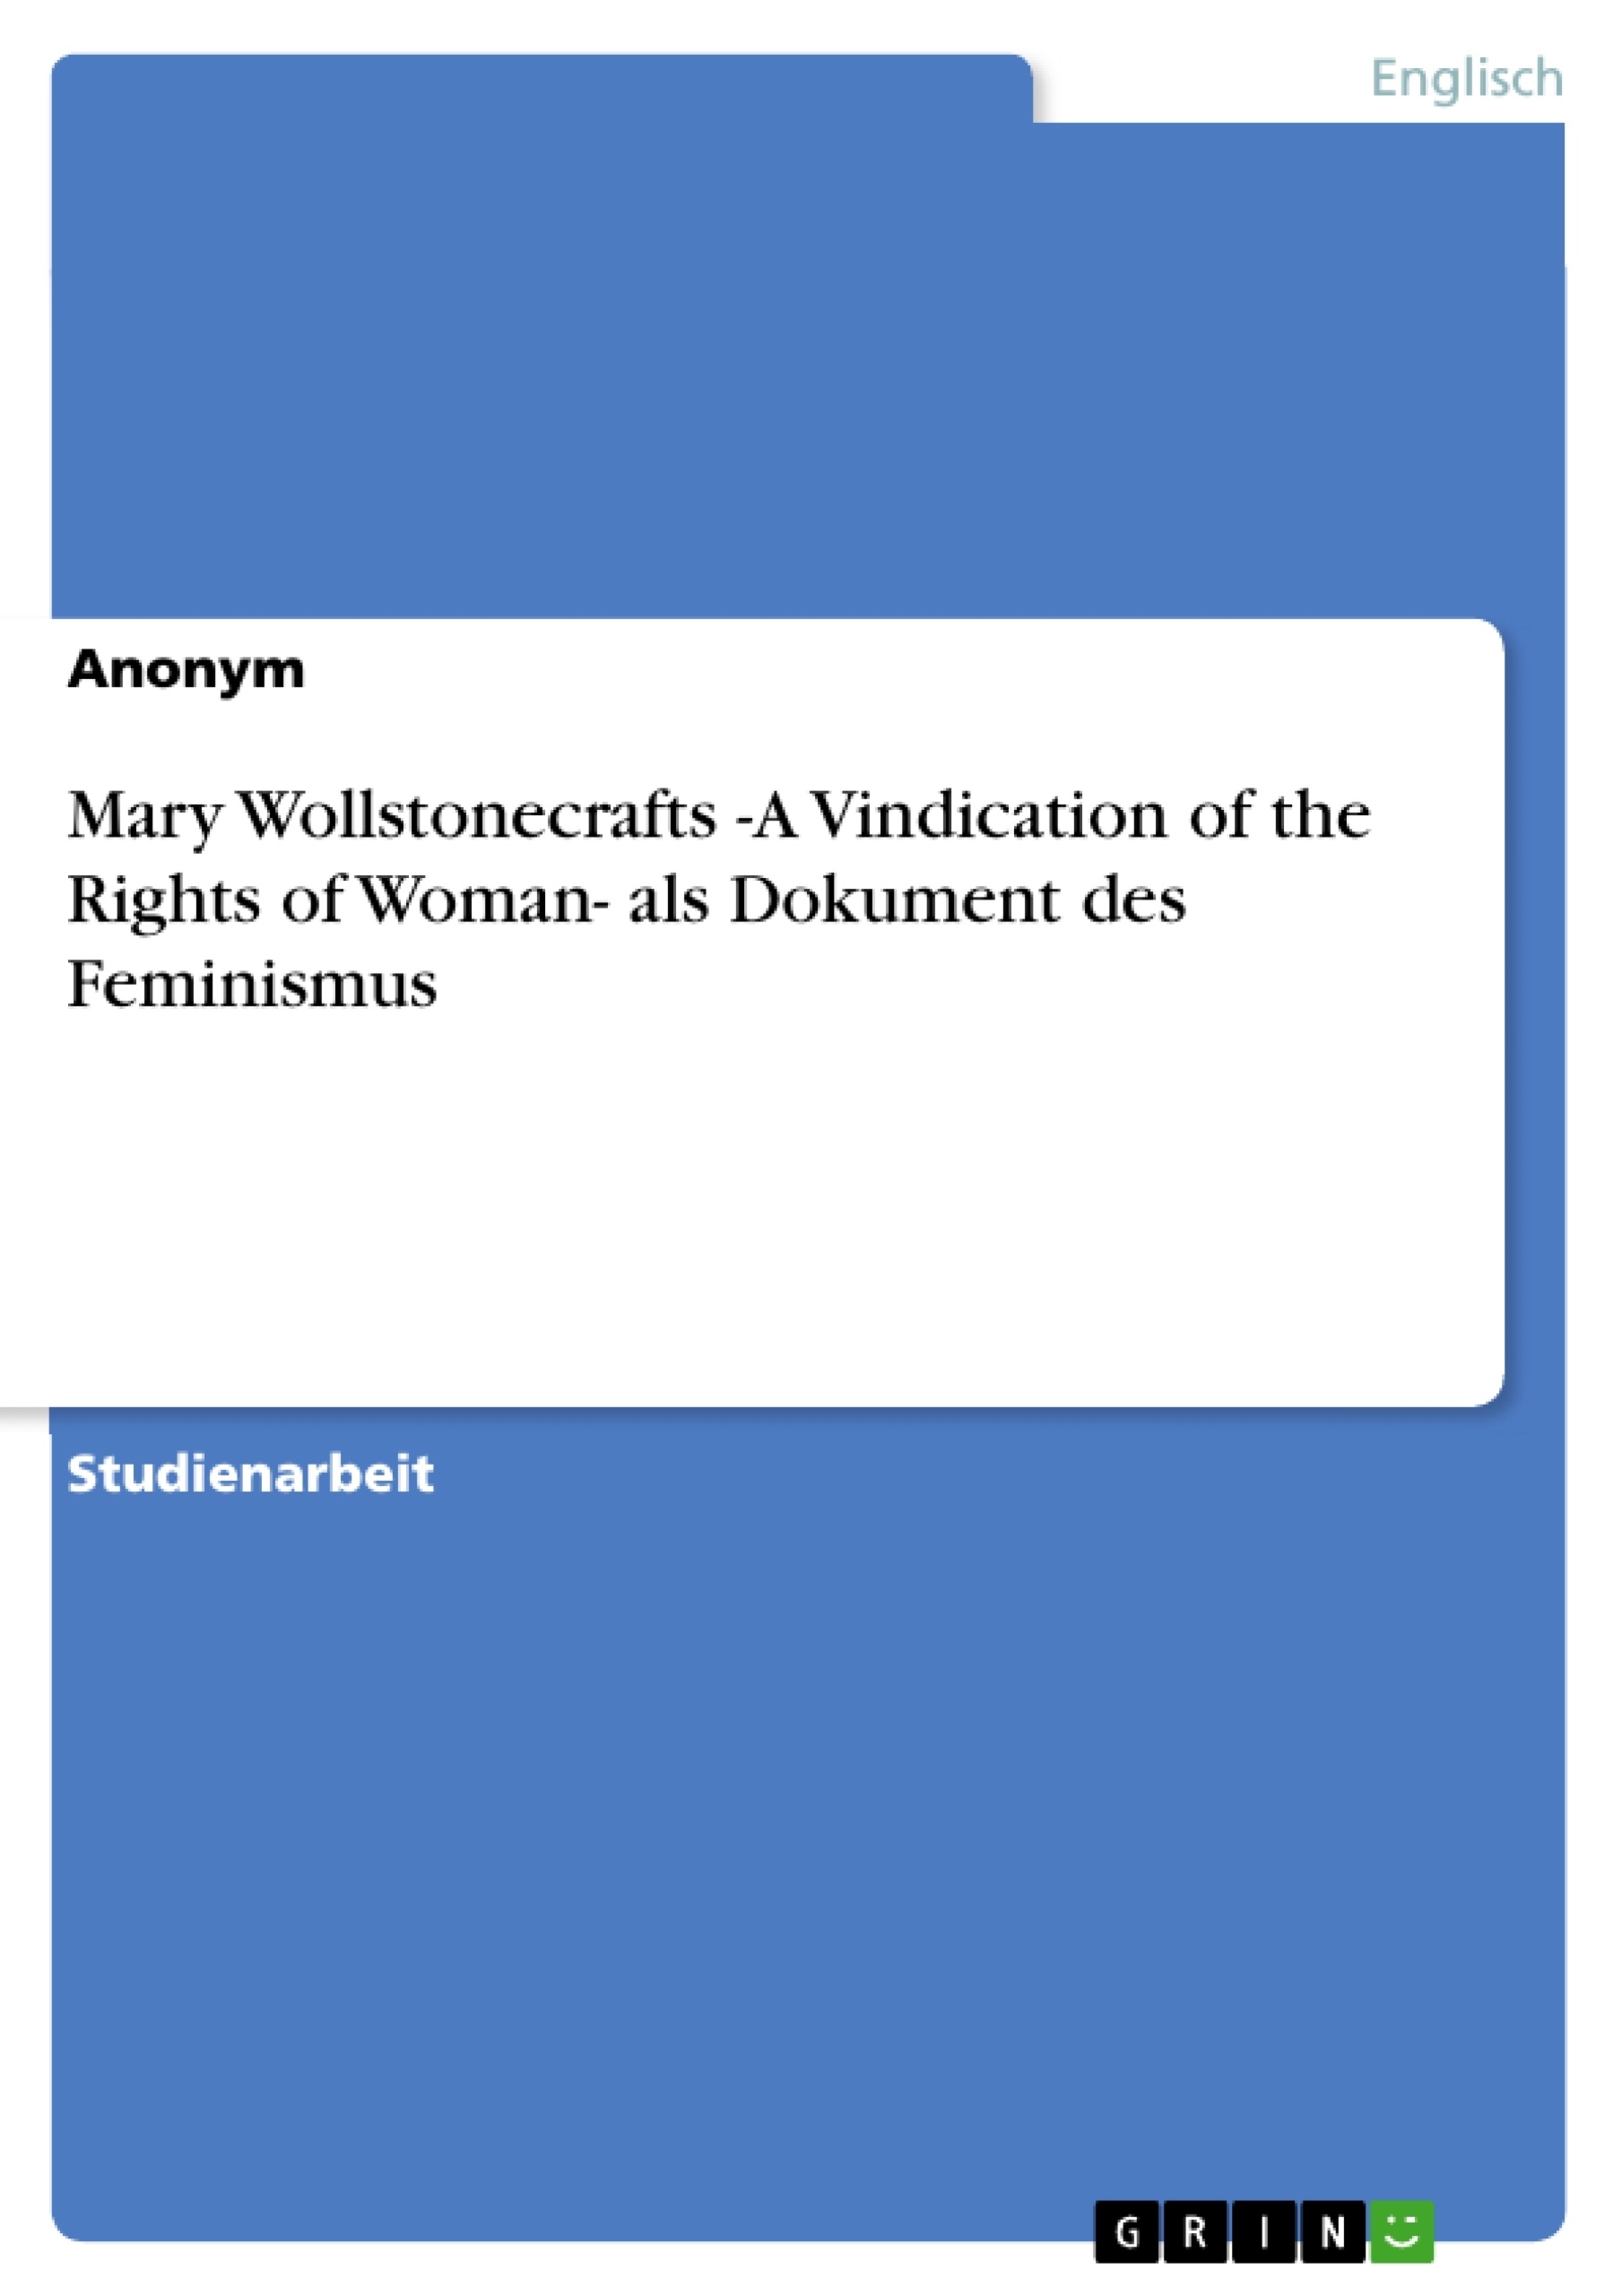 Titel: Mary Wollstonecrafts -A Vindication of the Rights of Woman- als Dokument des Feminismus